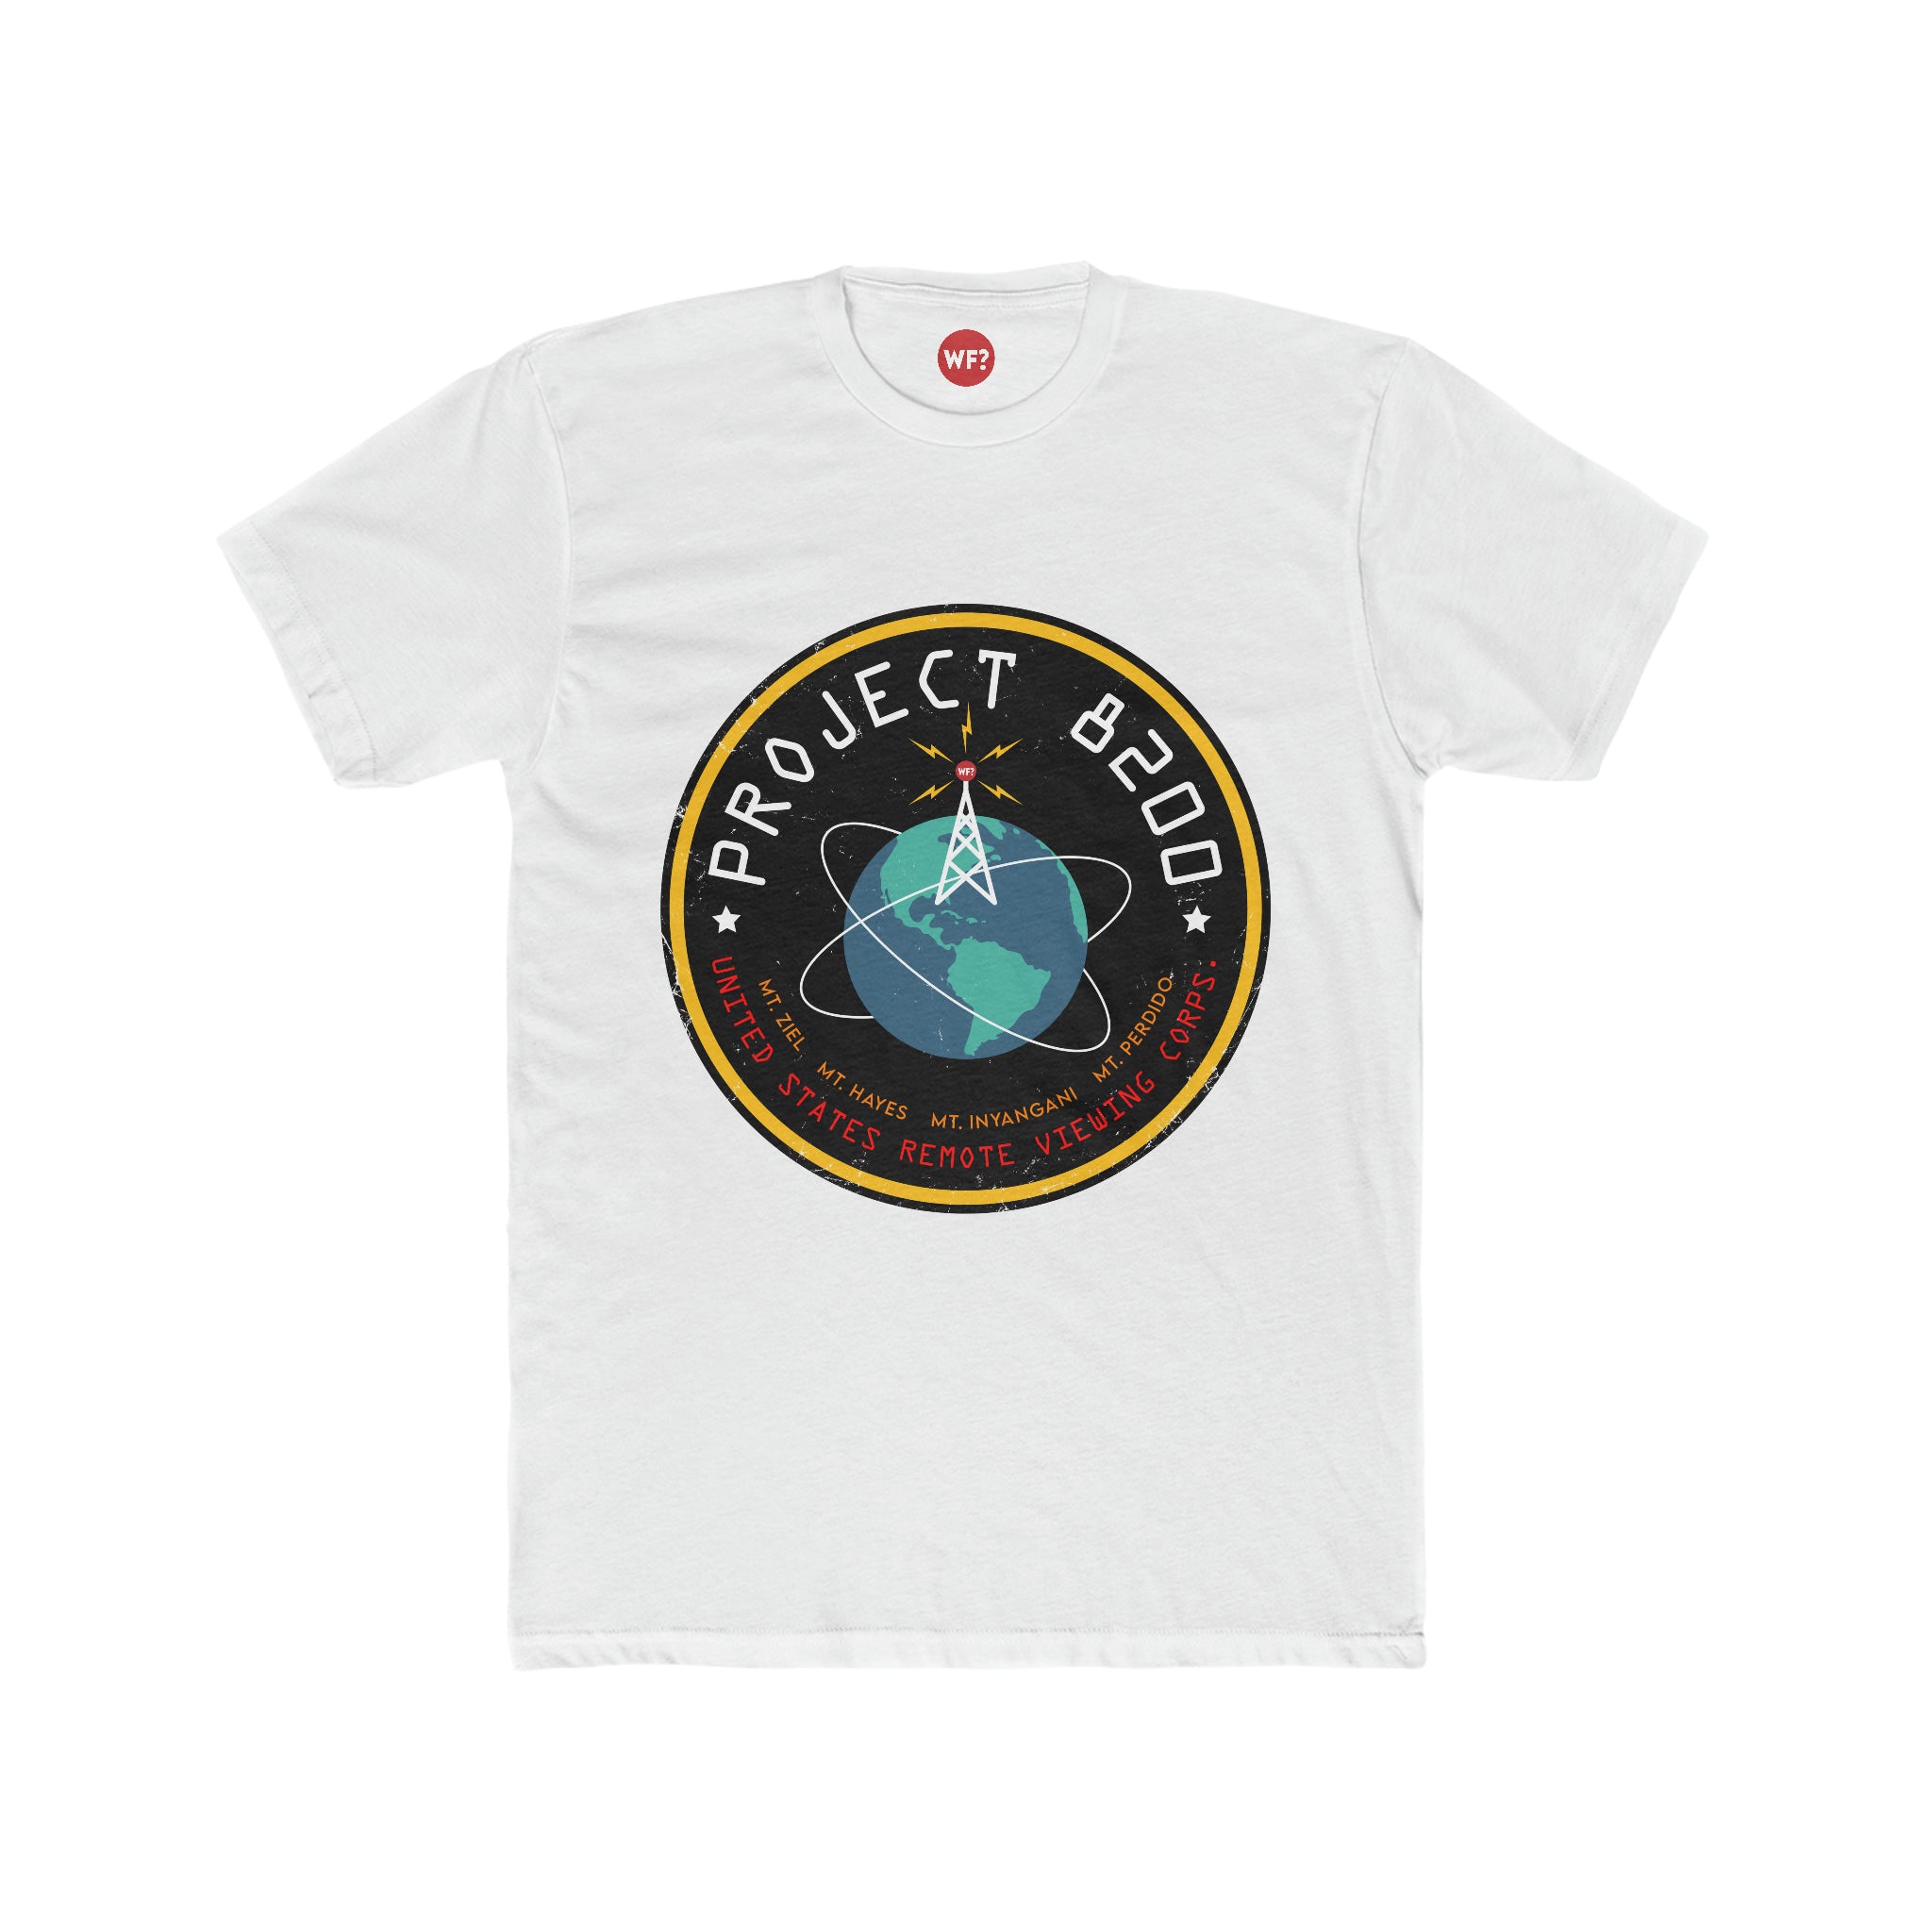 Buy solid-white 01/04 Project 8200 Limited T-Shirt